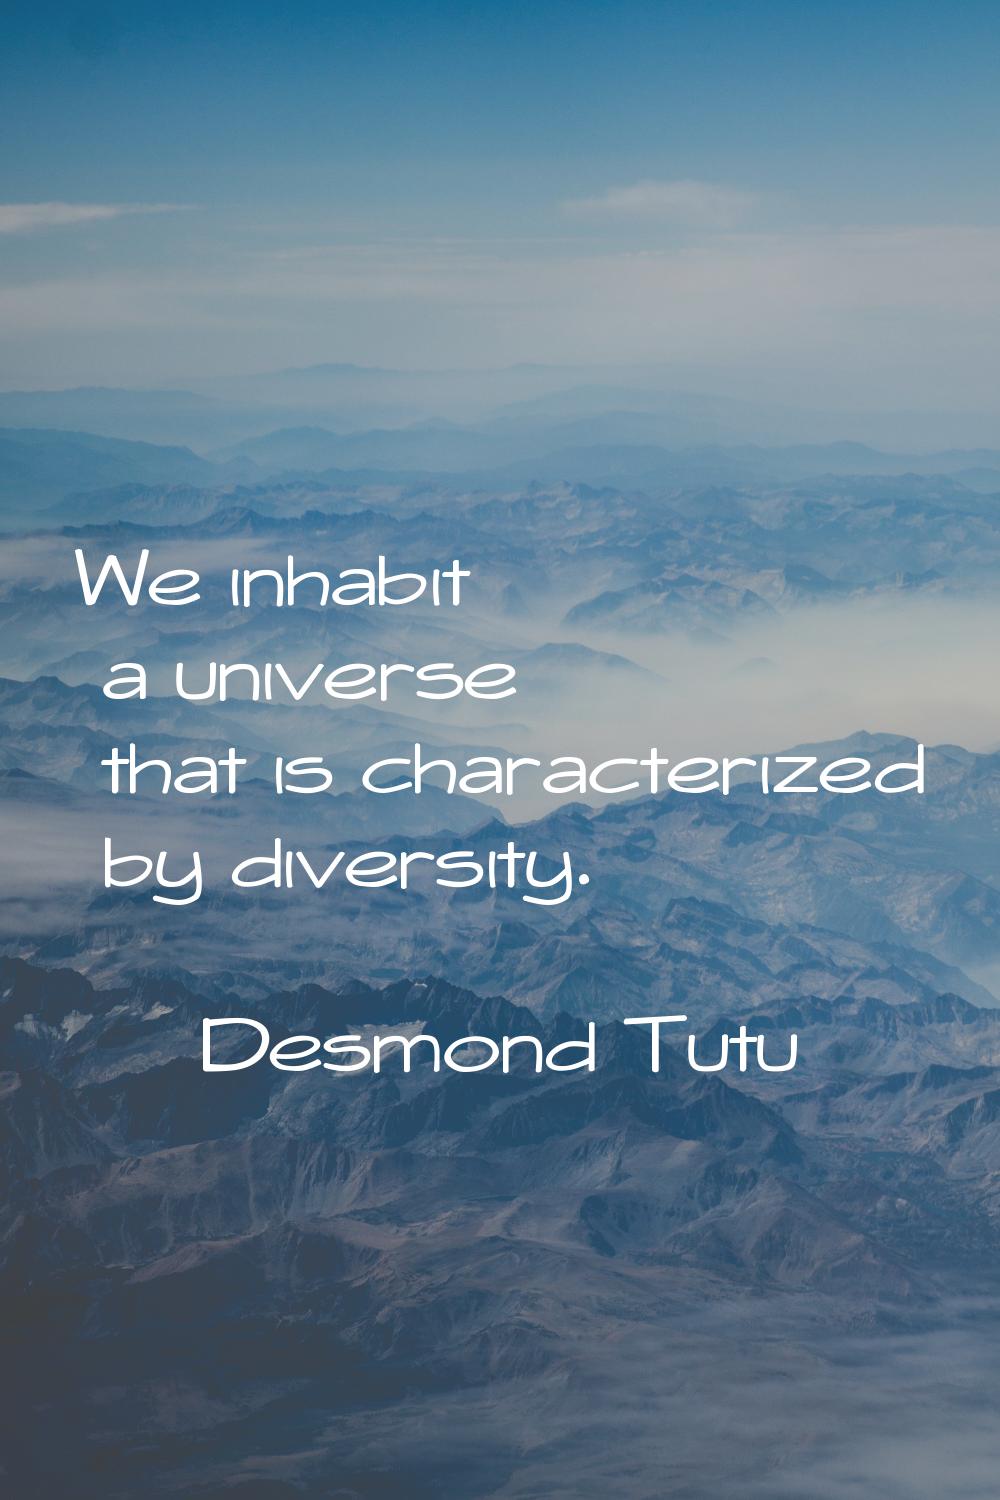 We inhabit a universe that is characterized by diversity.